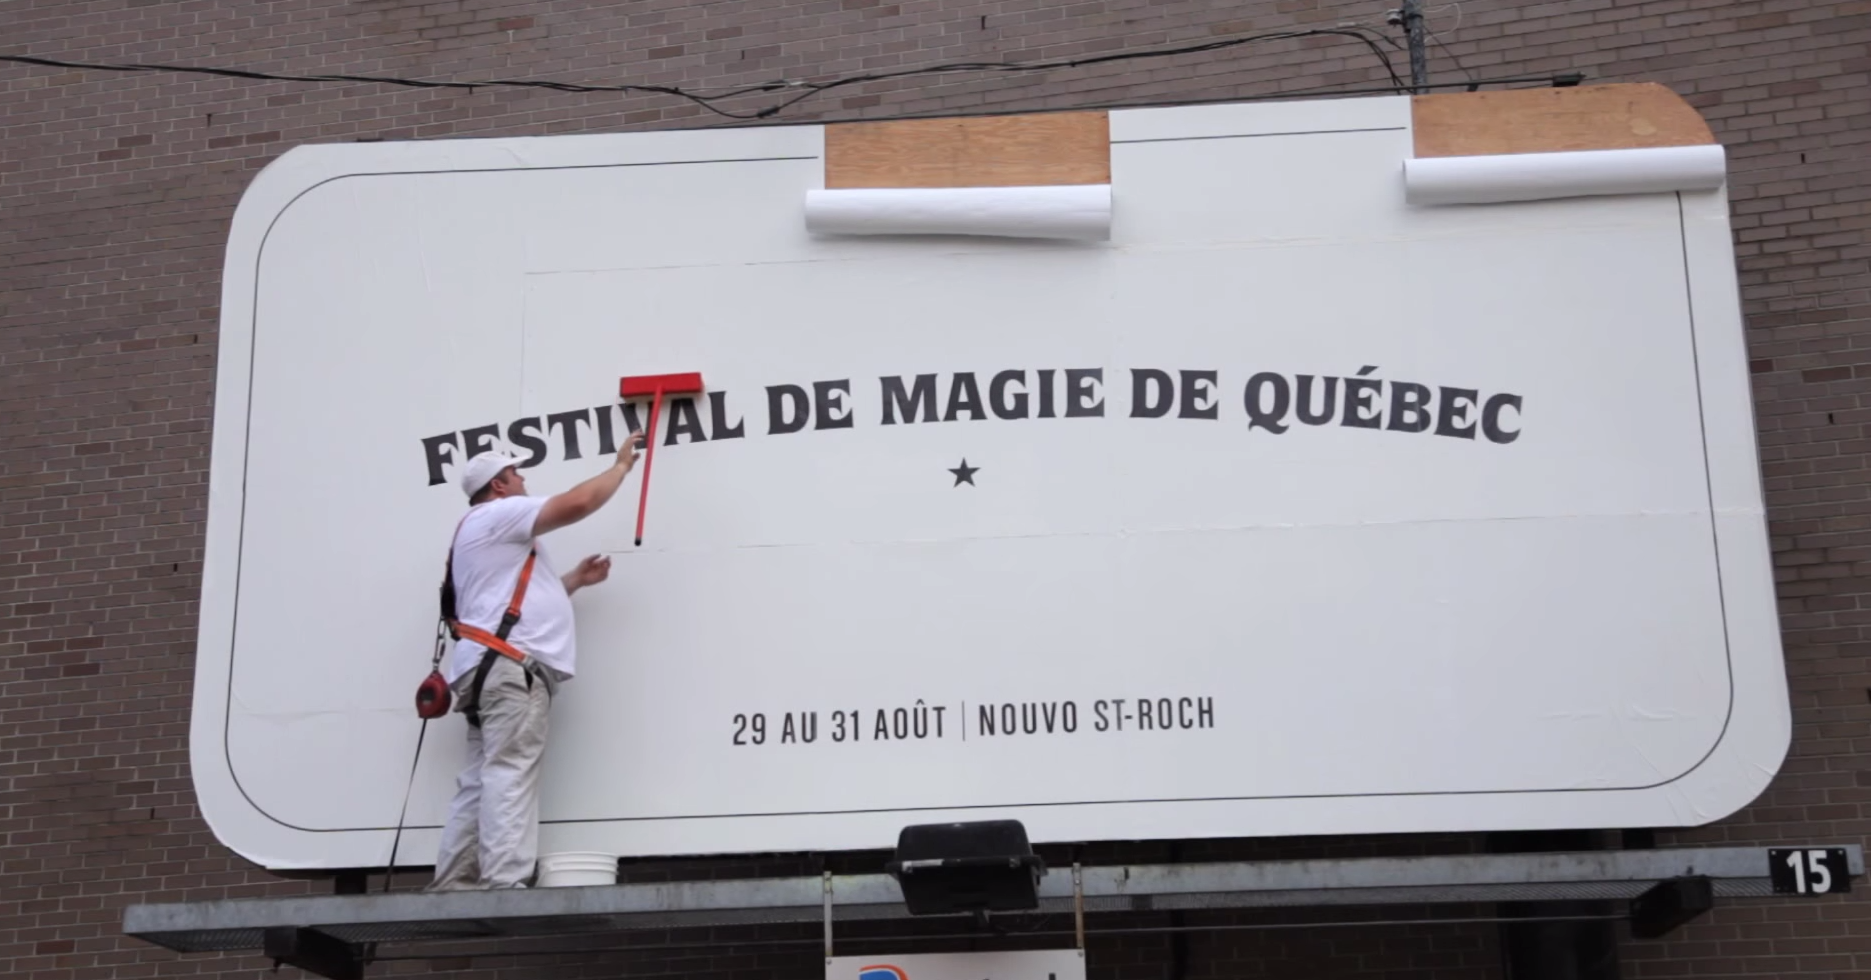 Brilliant promo for the Magical Festival of Quebec